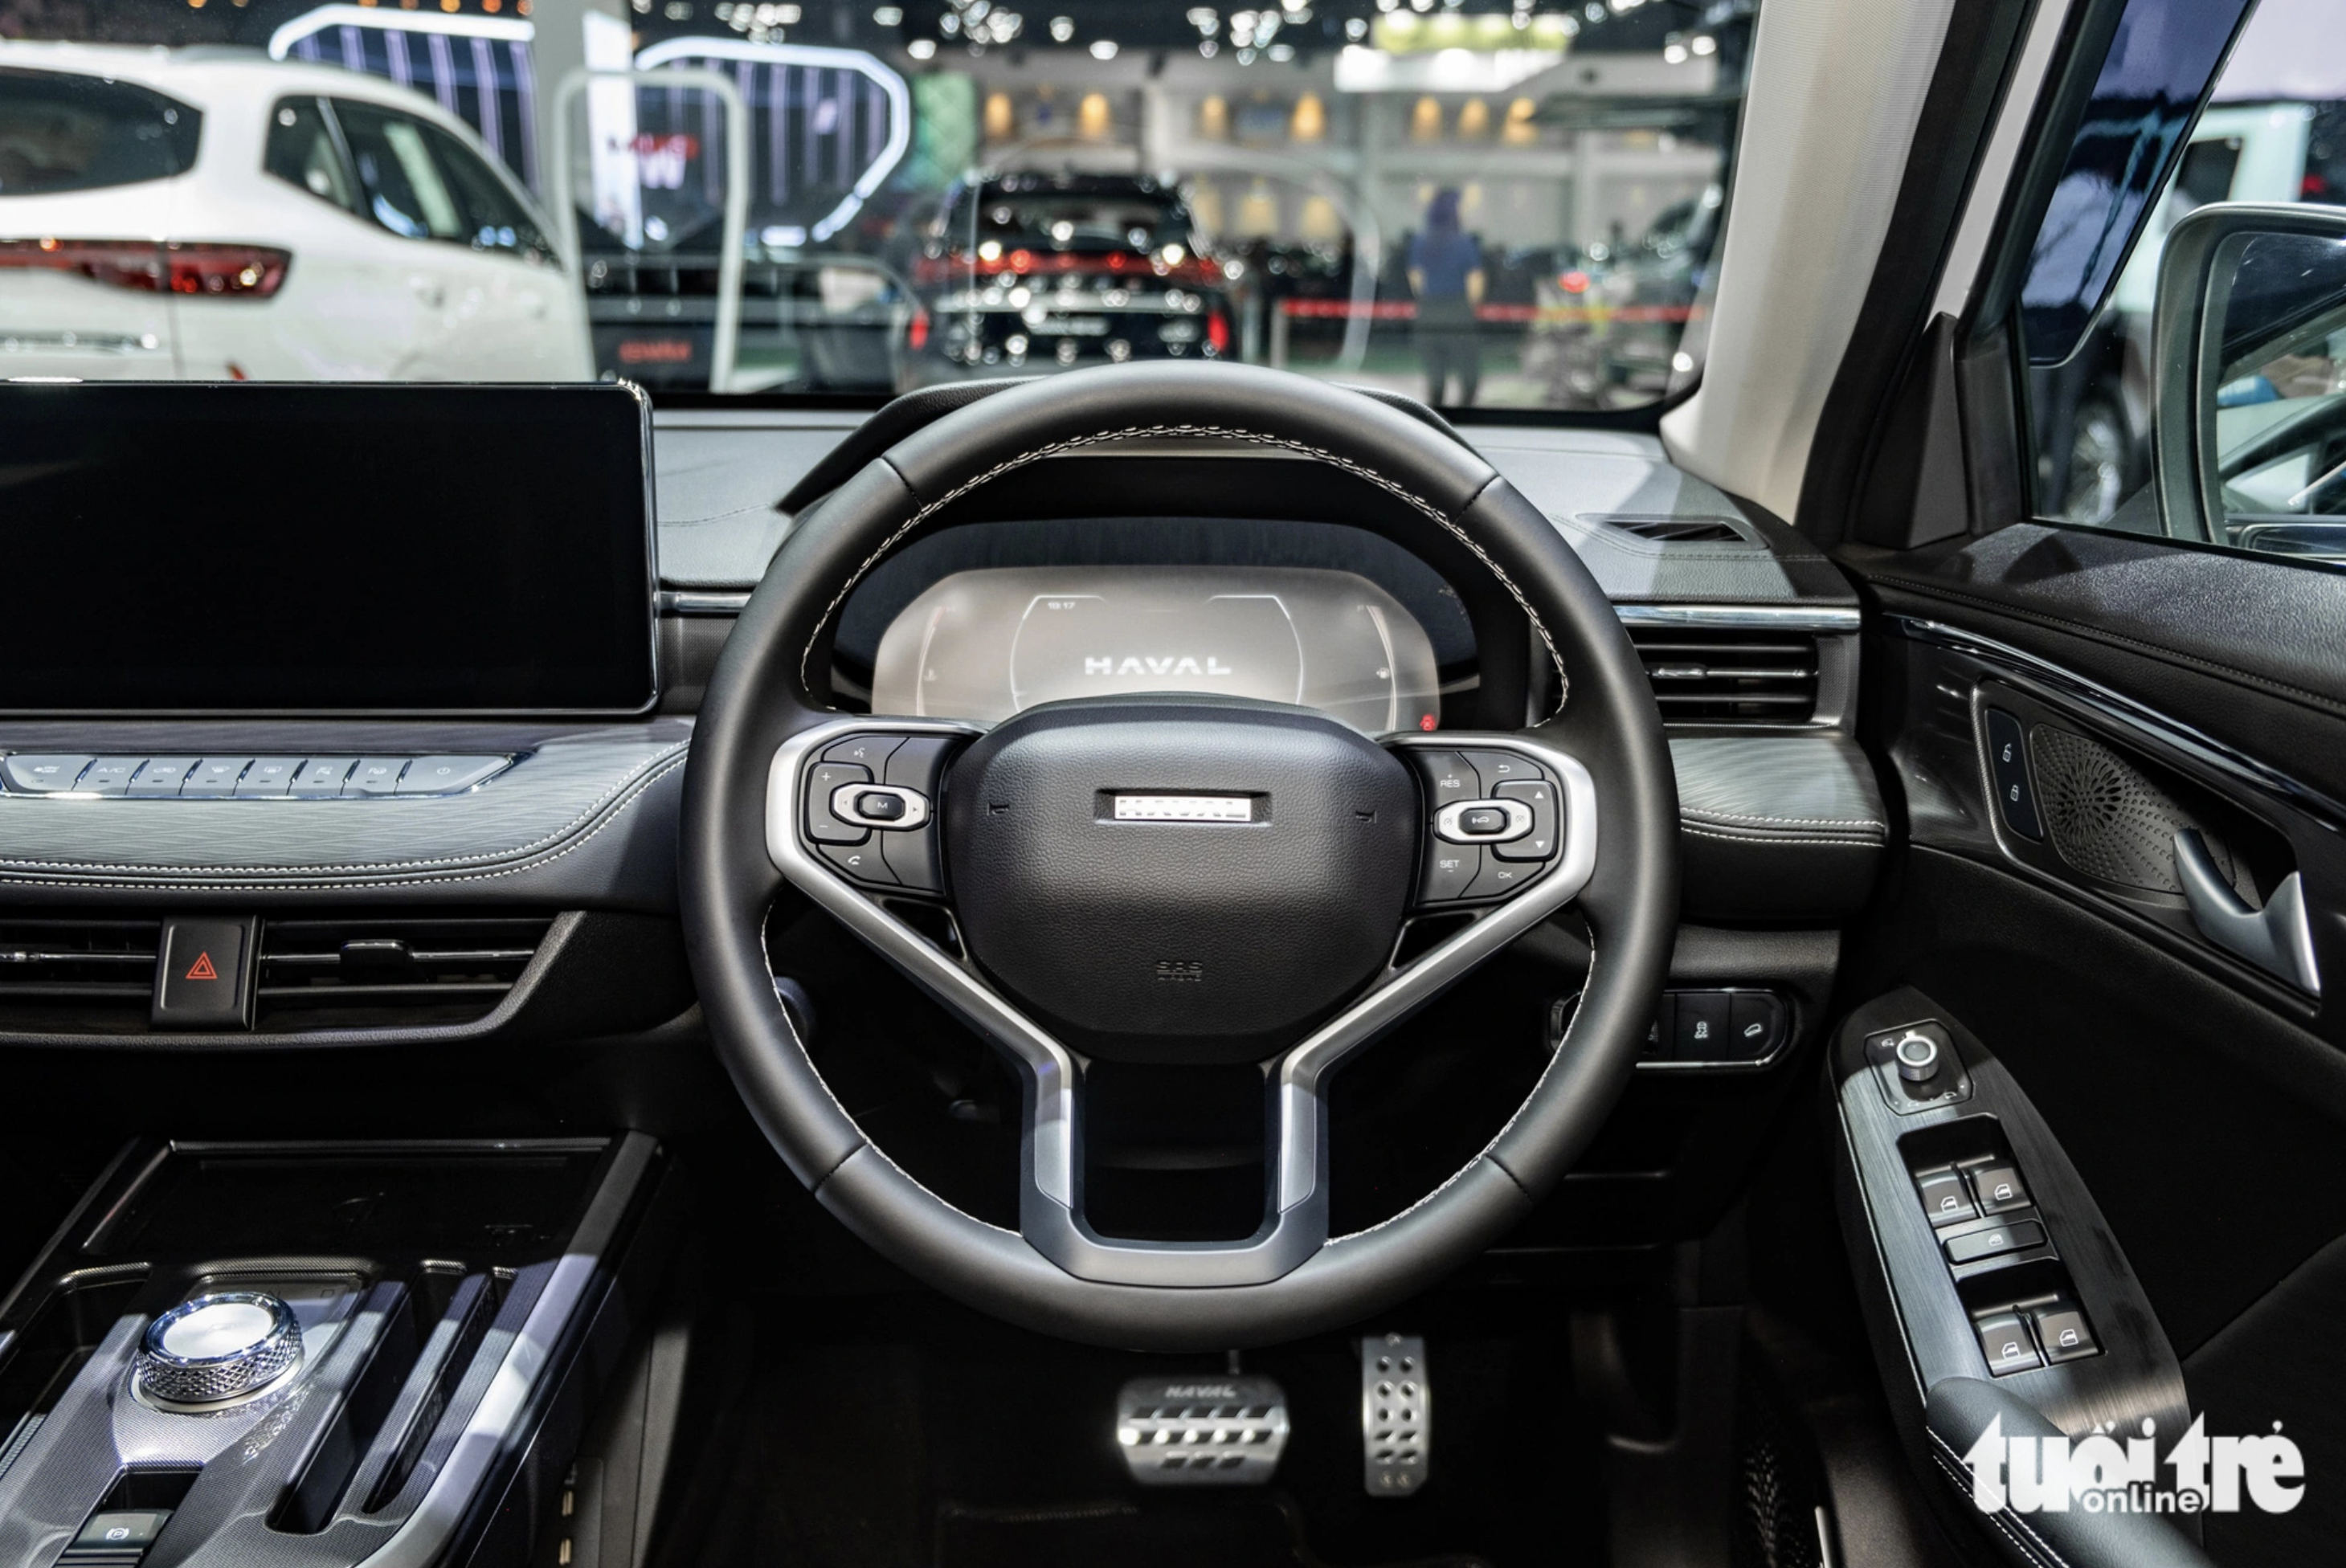 The Haval Jolion boasts a spacious cabin, an ergonomic steering wheel, a state-of-the-art multimedia touchscreen, a six-speaker sound system, and connectivity features --Apple CarPlay and Android Auto. Photo: Quoc Minh / Tuoi Tre